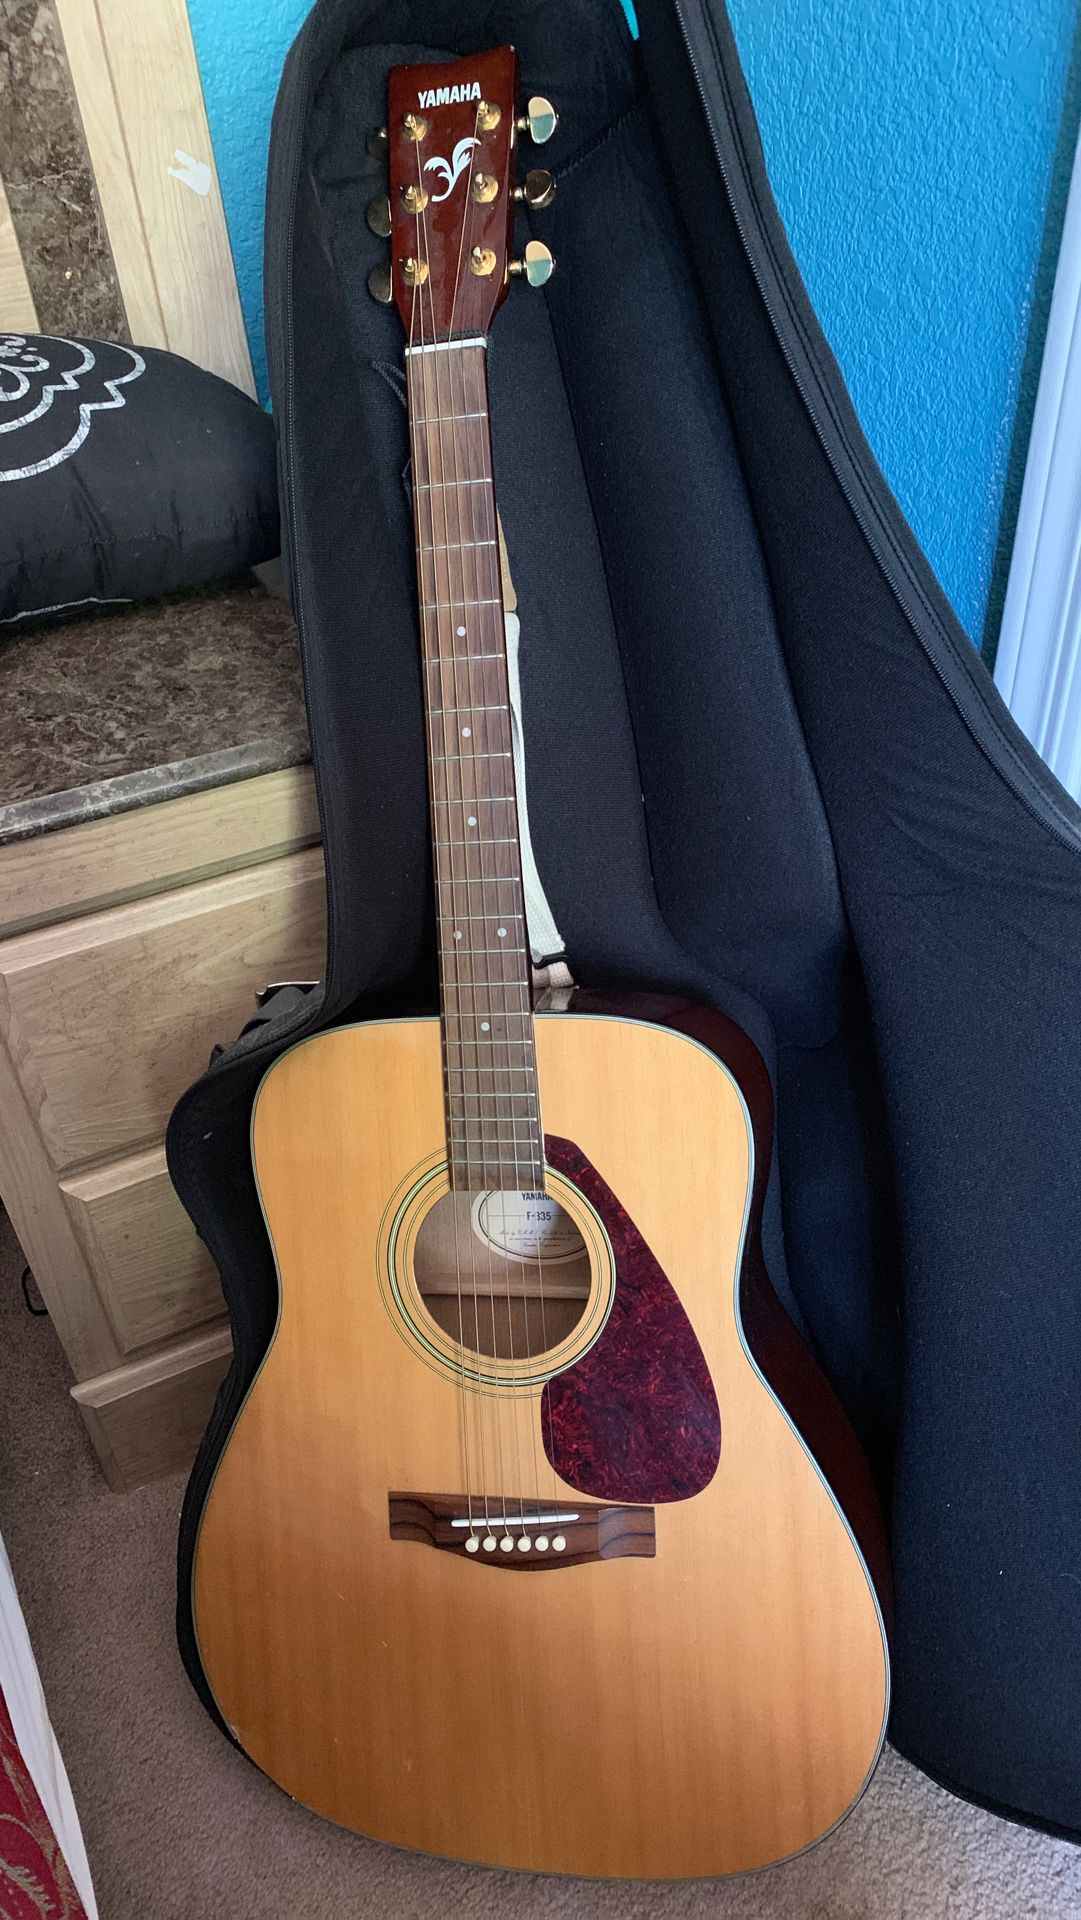 Rarely used Yamaha guitar. Has a minor dent/scratch that’s displayed in one of the pics. Asking for $140.